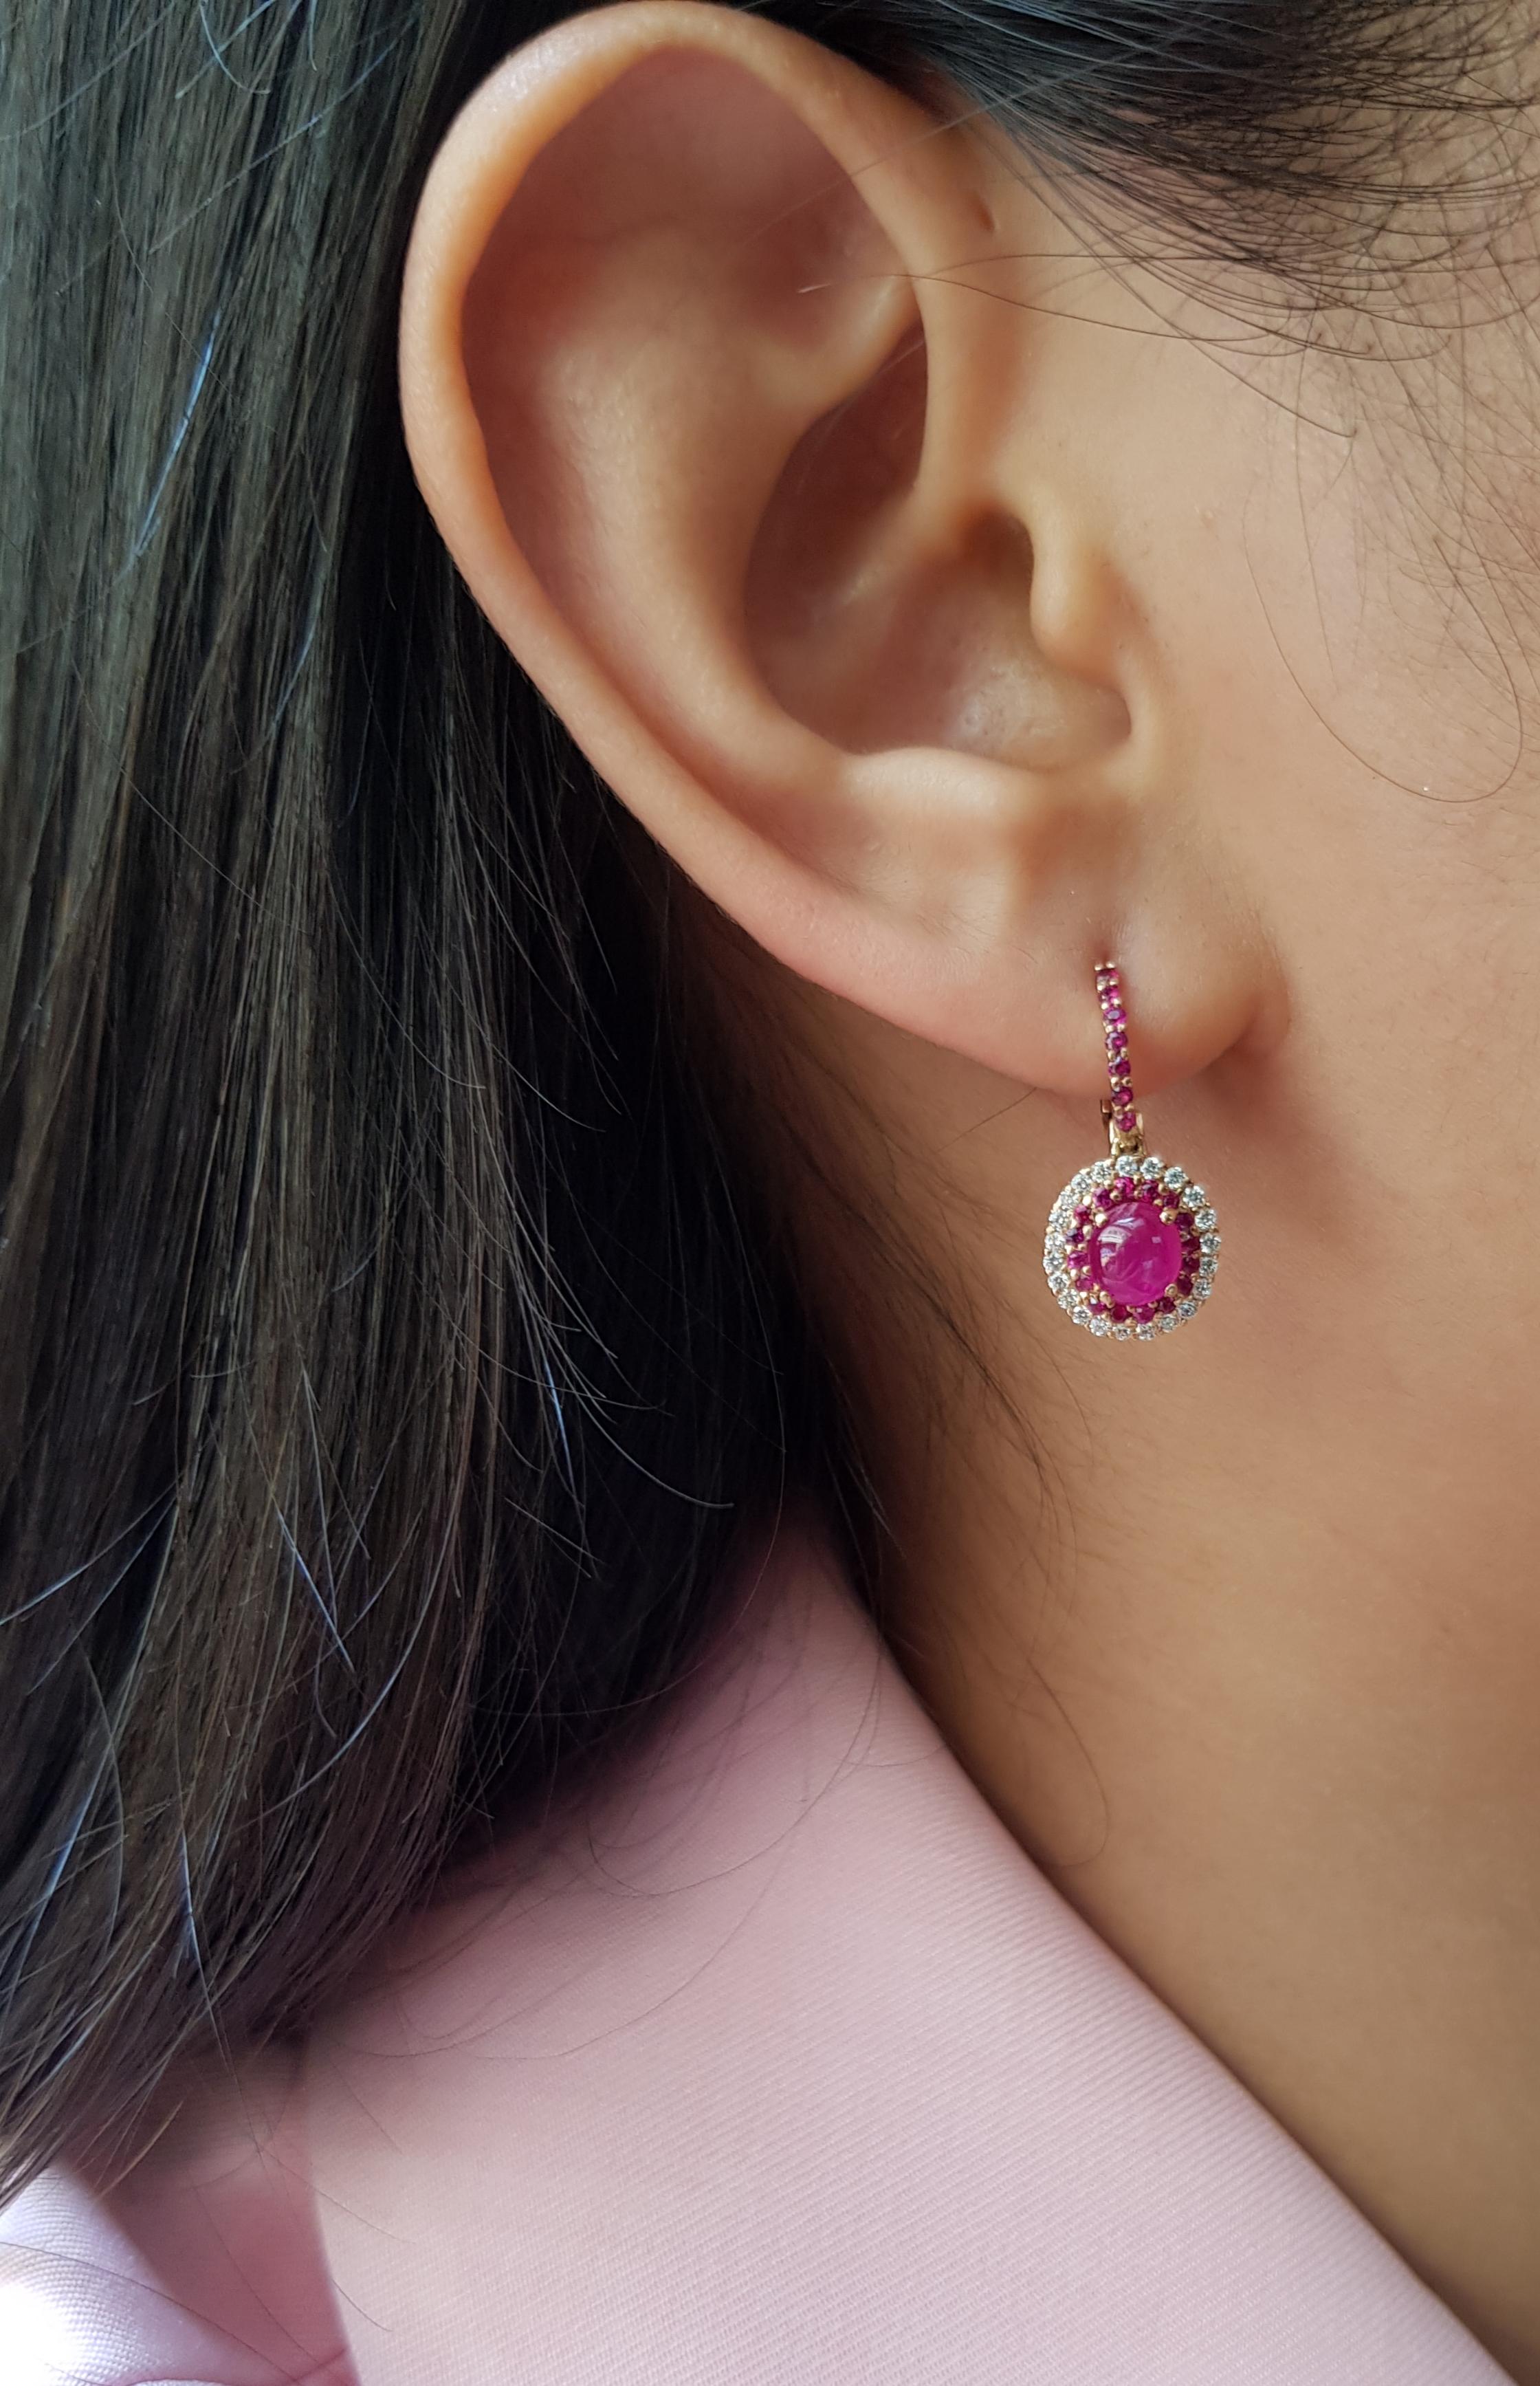 Cabochon Ruby 2.18 carats with Diamond 0.29 carat and Pink Sapphire 0.42 carat Earrings set in 18 Karat Rose Gold Settings

Width: 1.0 cm
Length: 2.5 cm 

